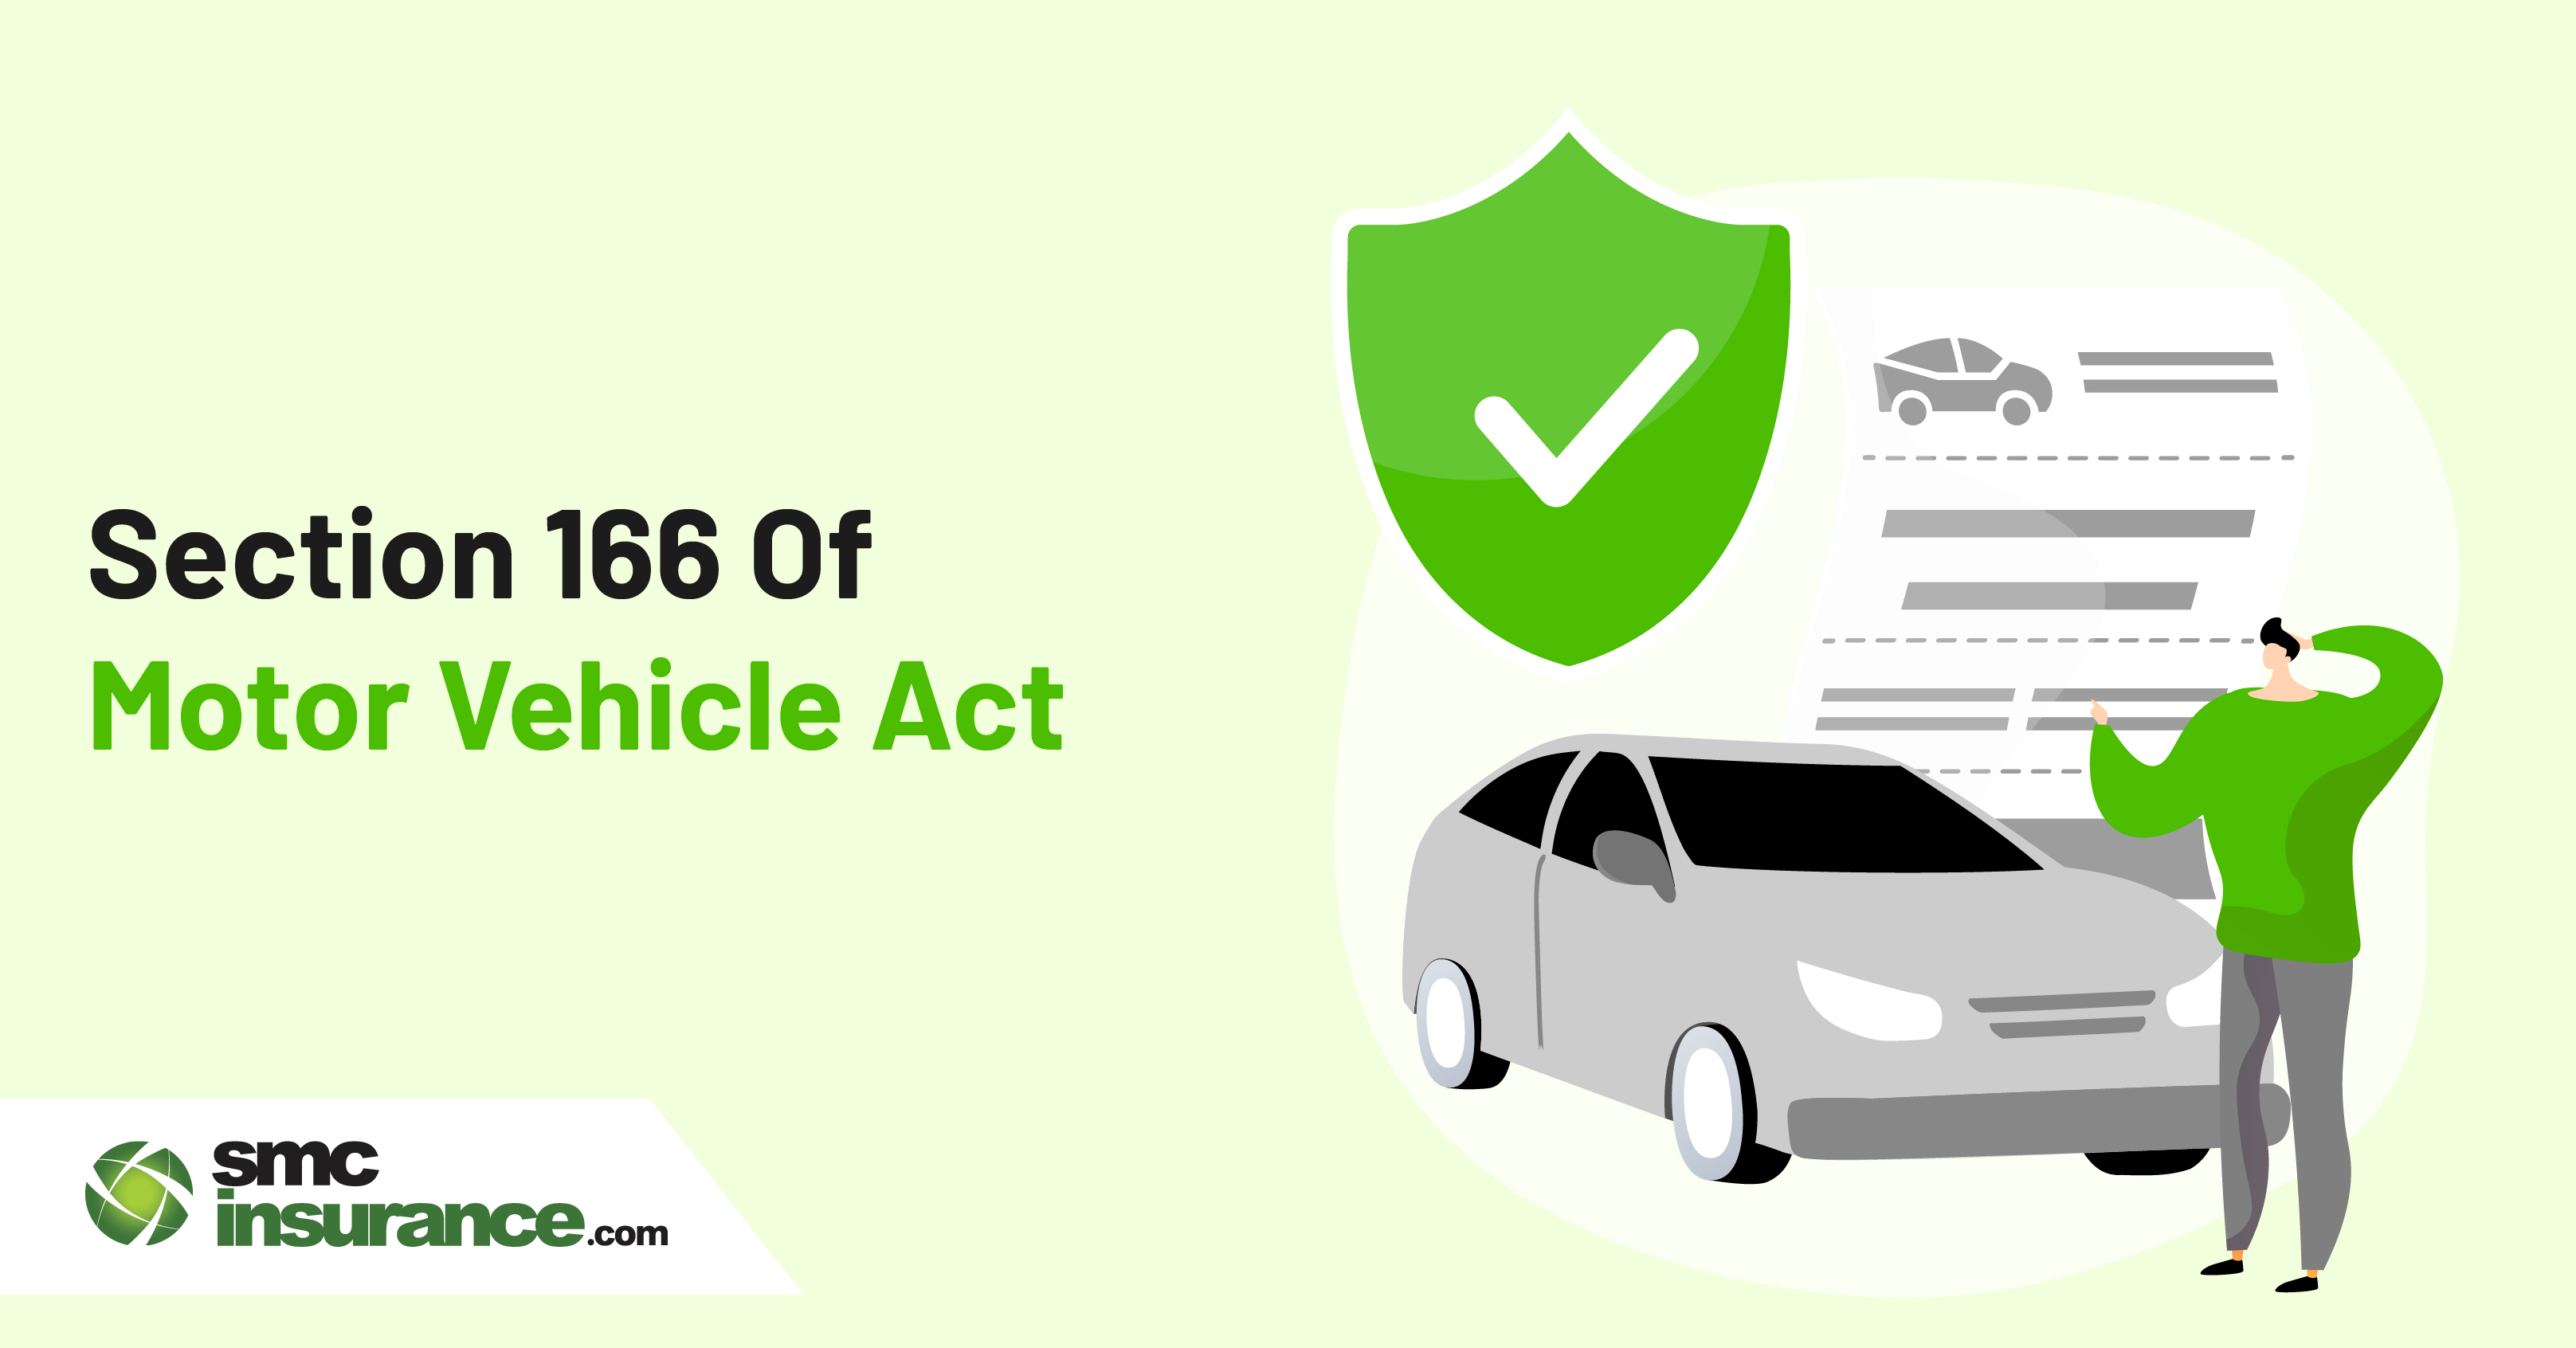 Section 166 Of Motor Vehicle Act